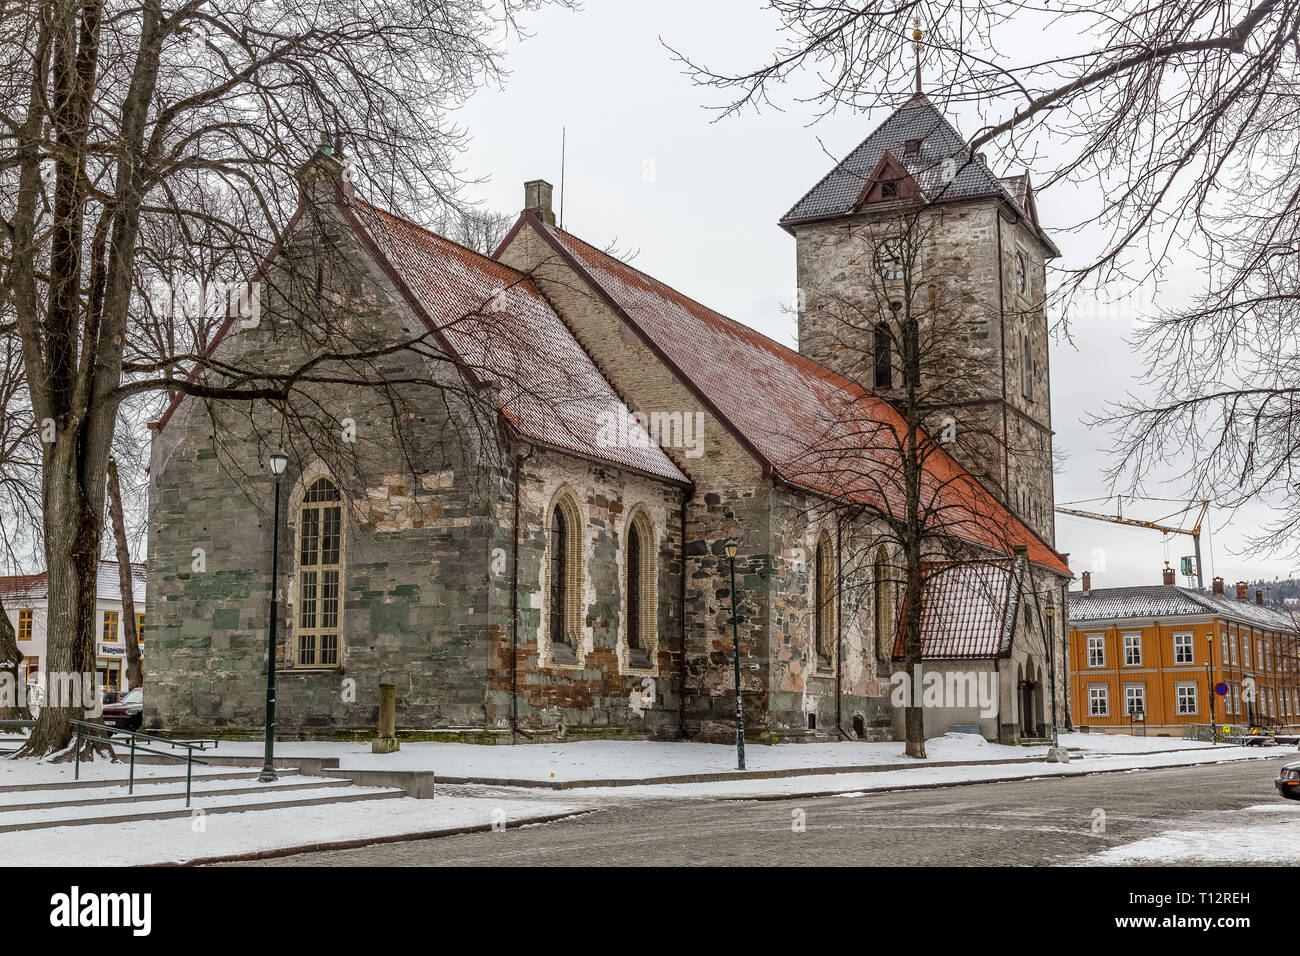 Var Frue, or Our Lady's,  church in the town of Trondheim in Norway. Stock Photo